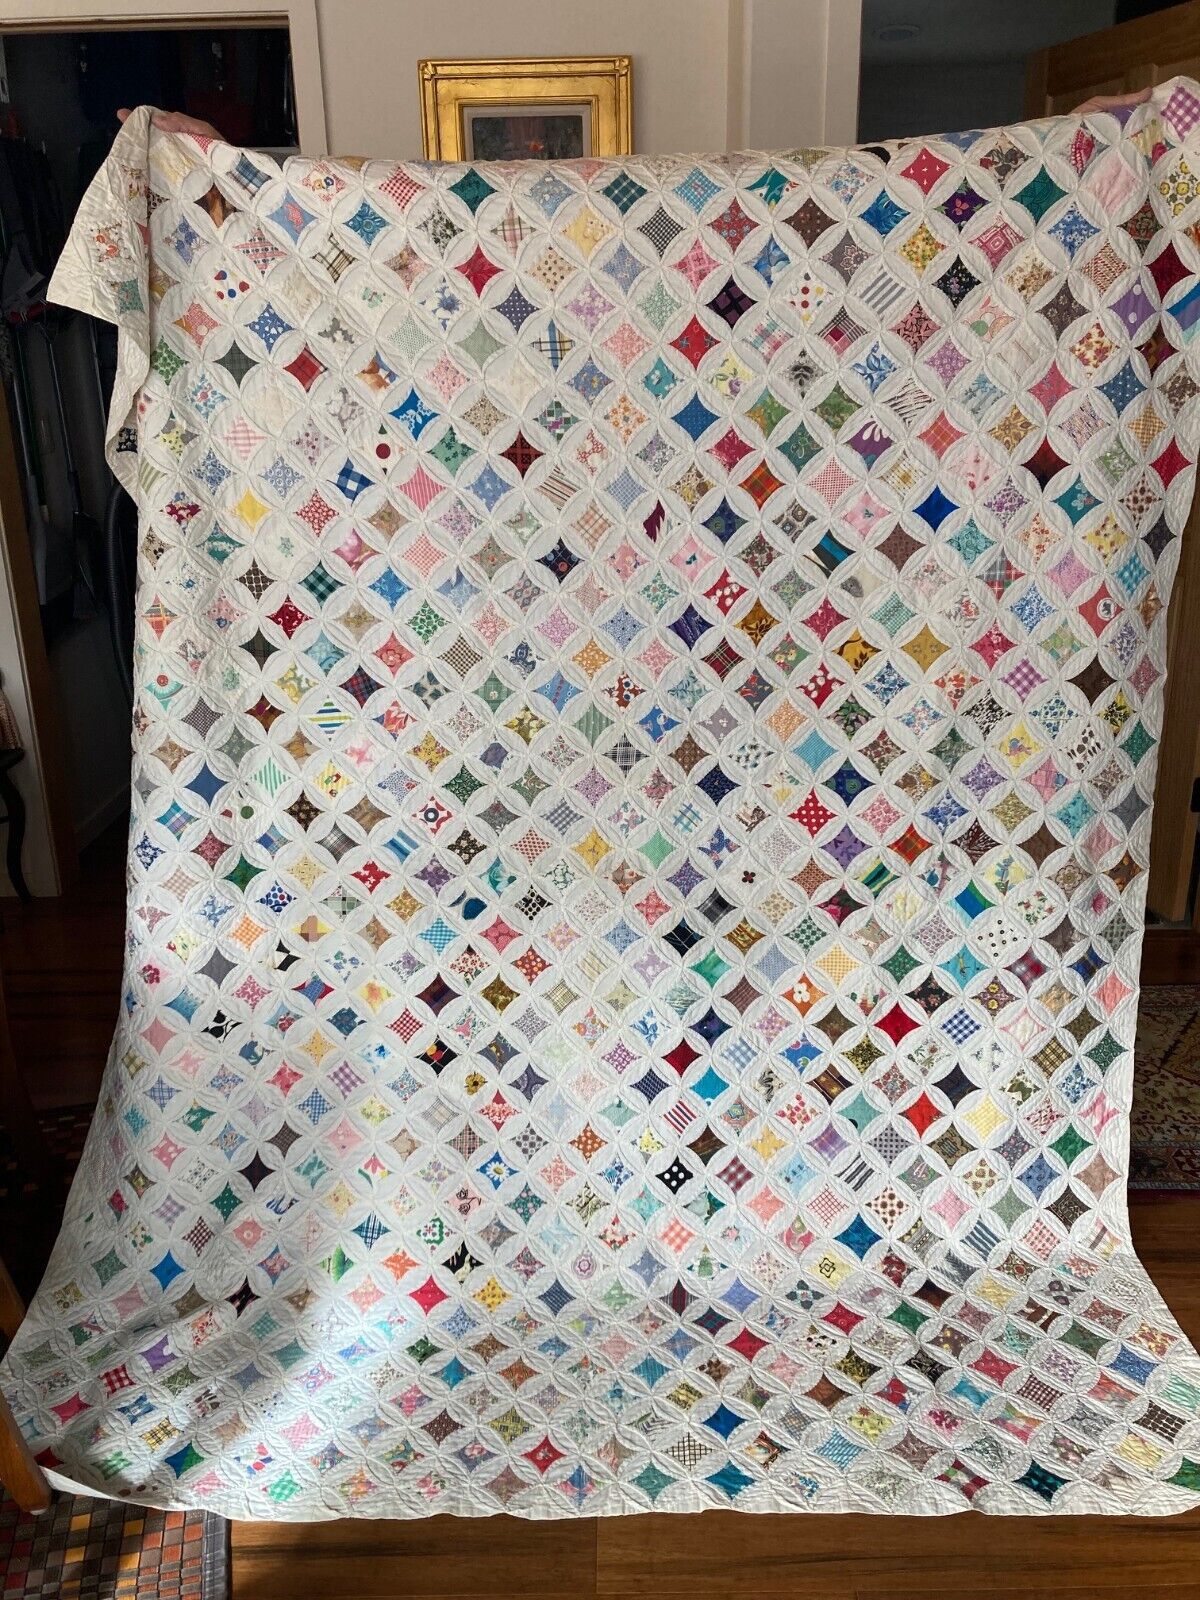 vintage cathedral window quilt - appraised with certificate of authenticity